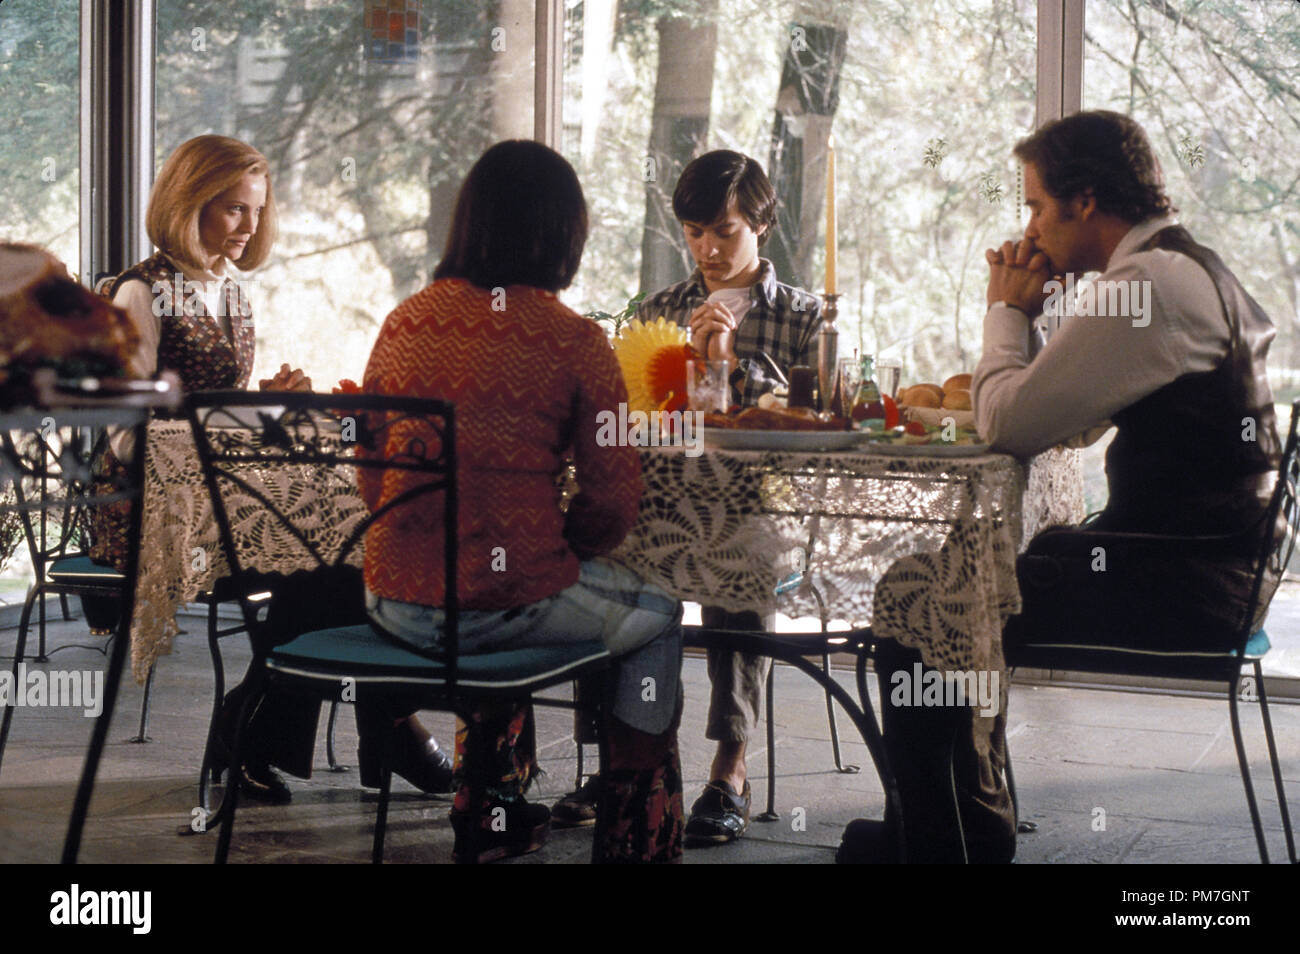 Film Still from 'The Ice Storm' Joan Allen, Christina Ricci, Tobey Maguire, Kevin Kline © 1997 Fox Searchlight Photo Credit: Barry Wetcher  File Reference # 31013073THA  For Editorial Use Only - All Rights Reserved Stock Photo